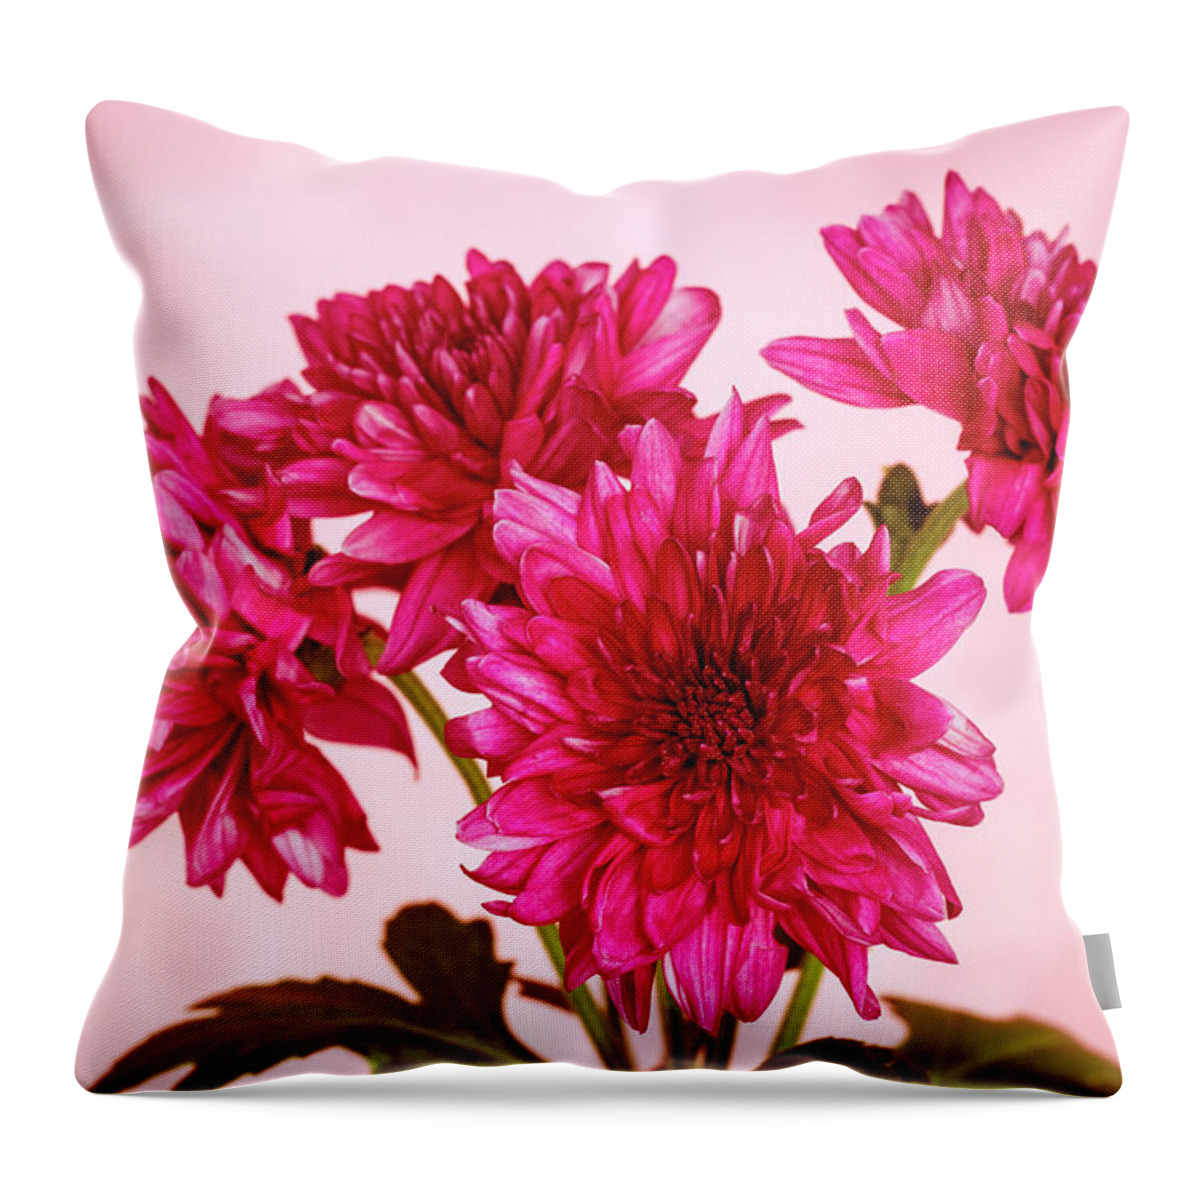 Chrysanth Throw Pillow featuring the photograph Pink Chrysanths by Tanya C Smith